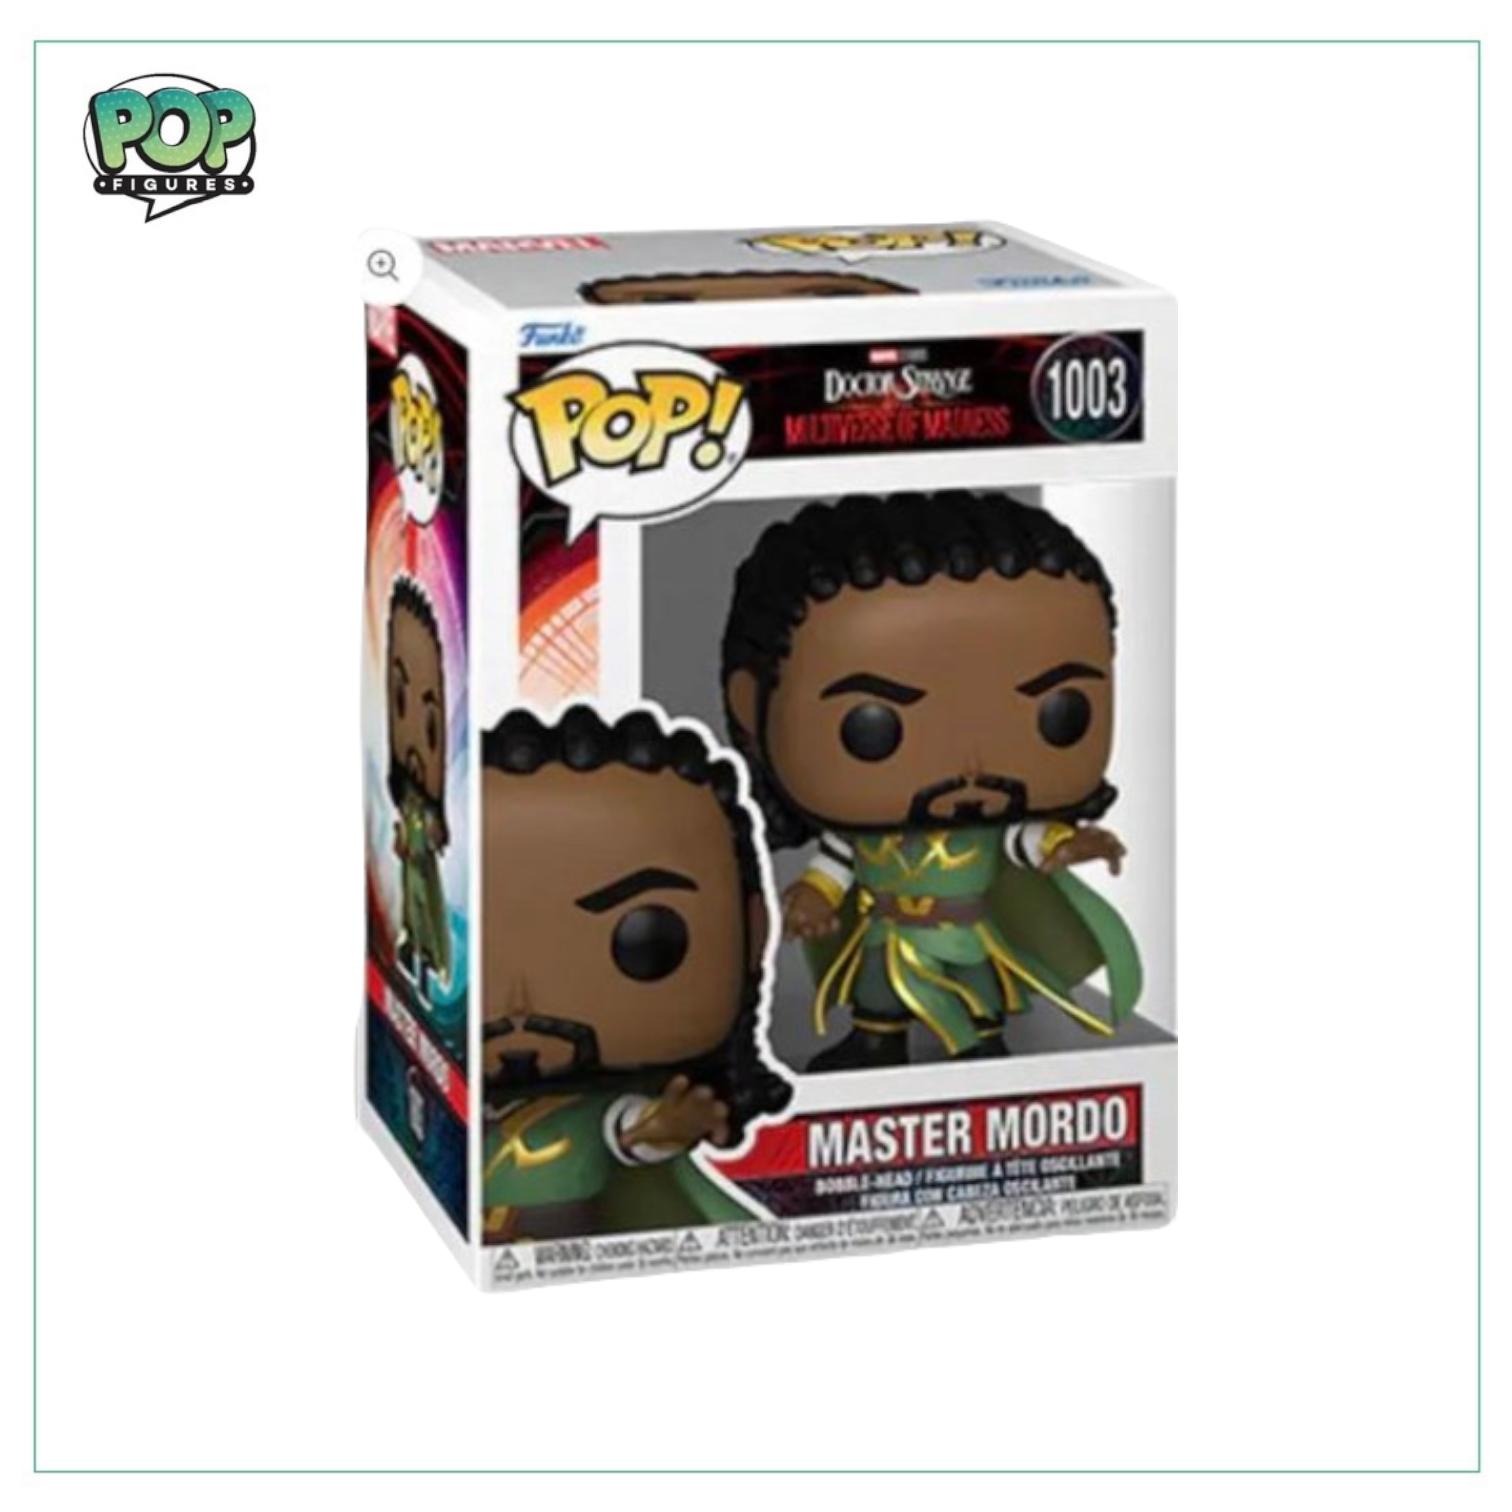 Master Mordo #1003 Funko Pop! Doctor Strange and the Multiverse of Madness